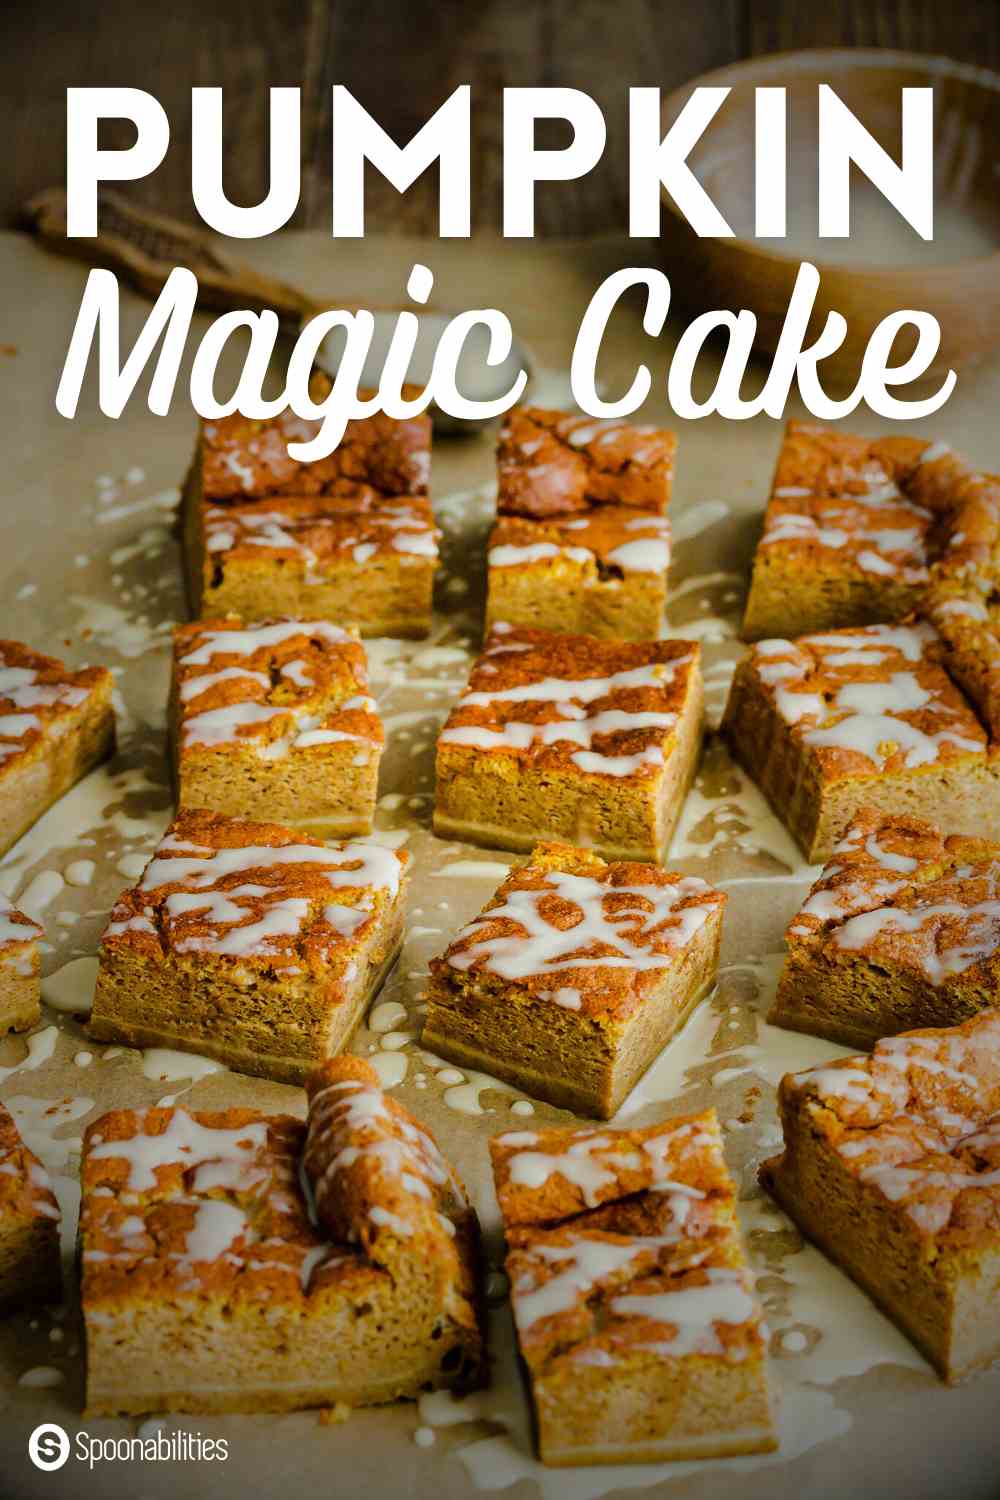 Pumpkin Magic Cake squares drizzled with maple syrup